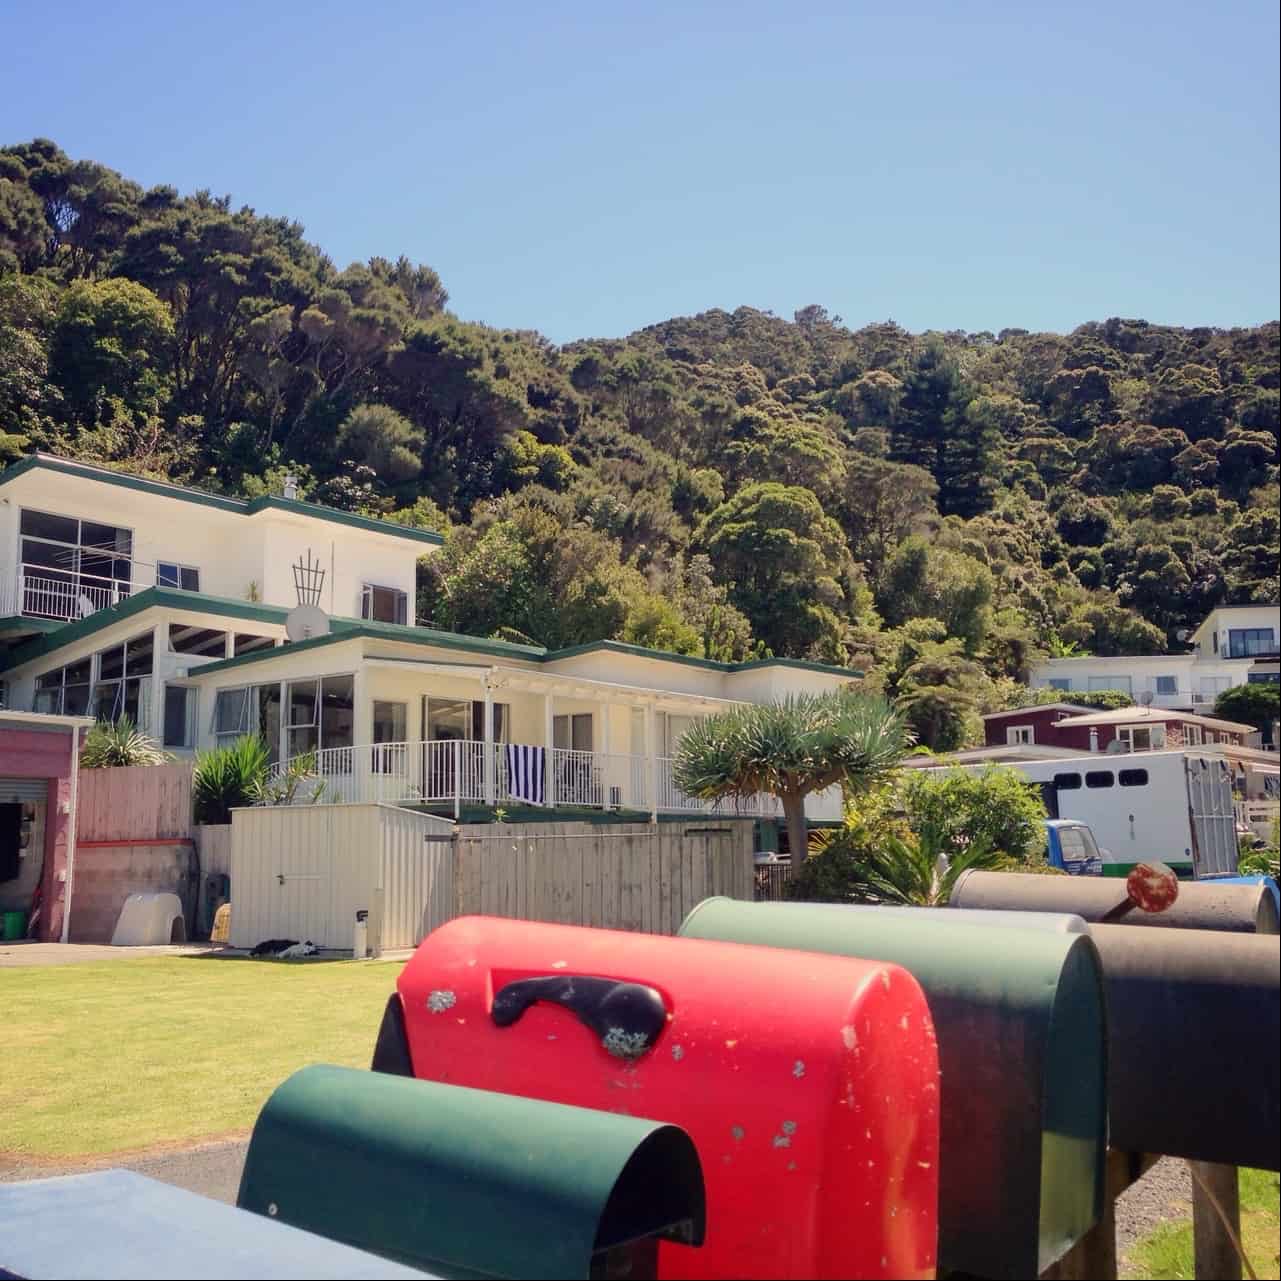 Opito Bay is a typical kiwi seaside settlement, with traditional baches (holiday homes).